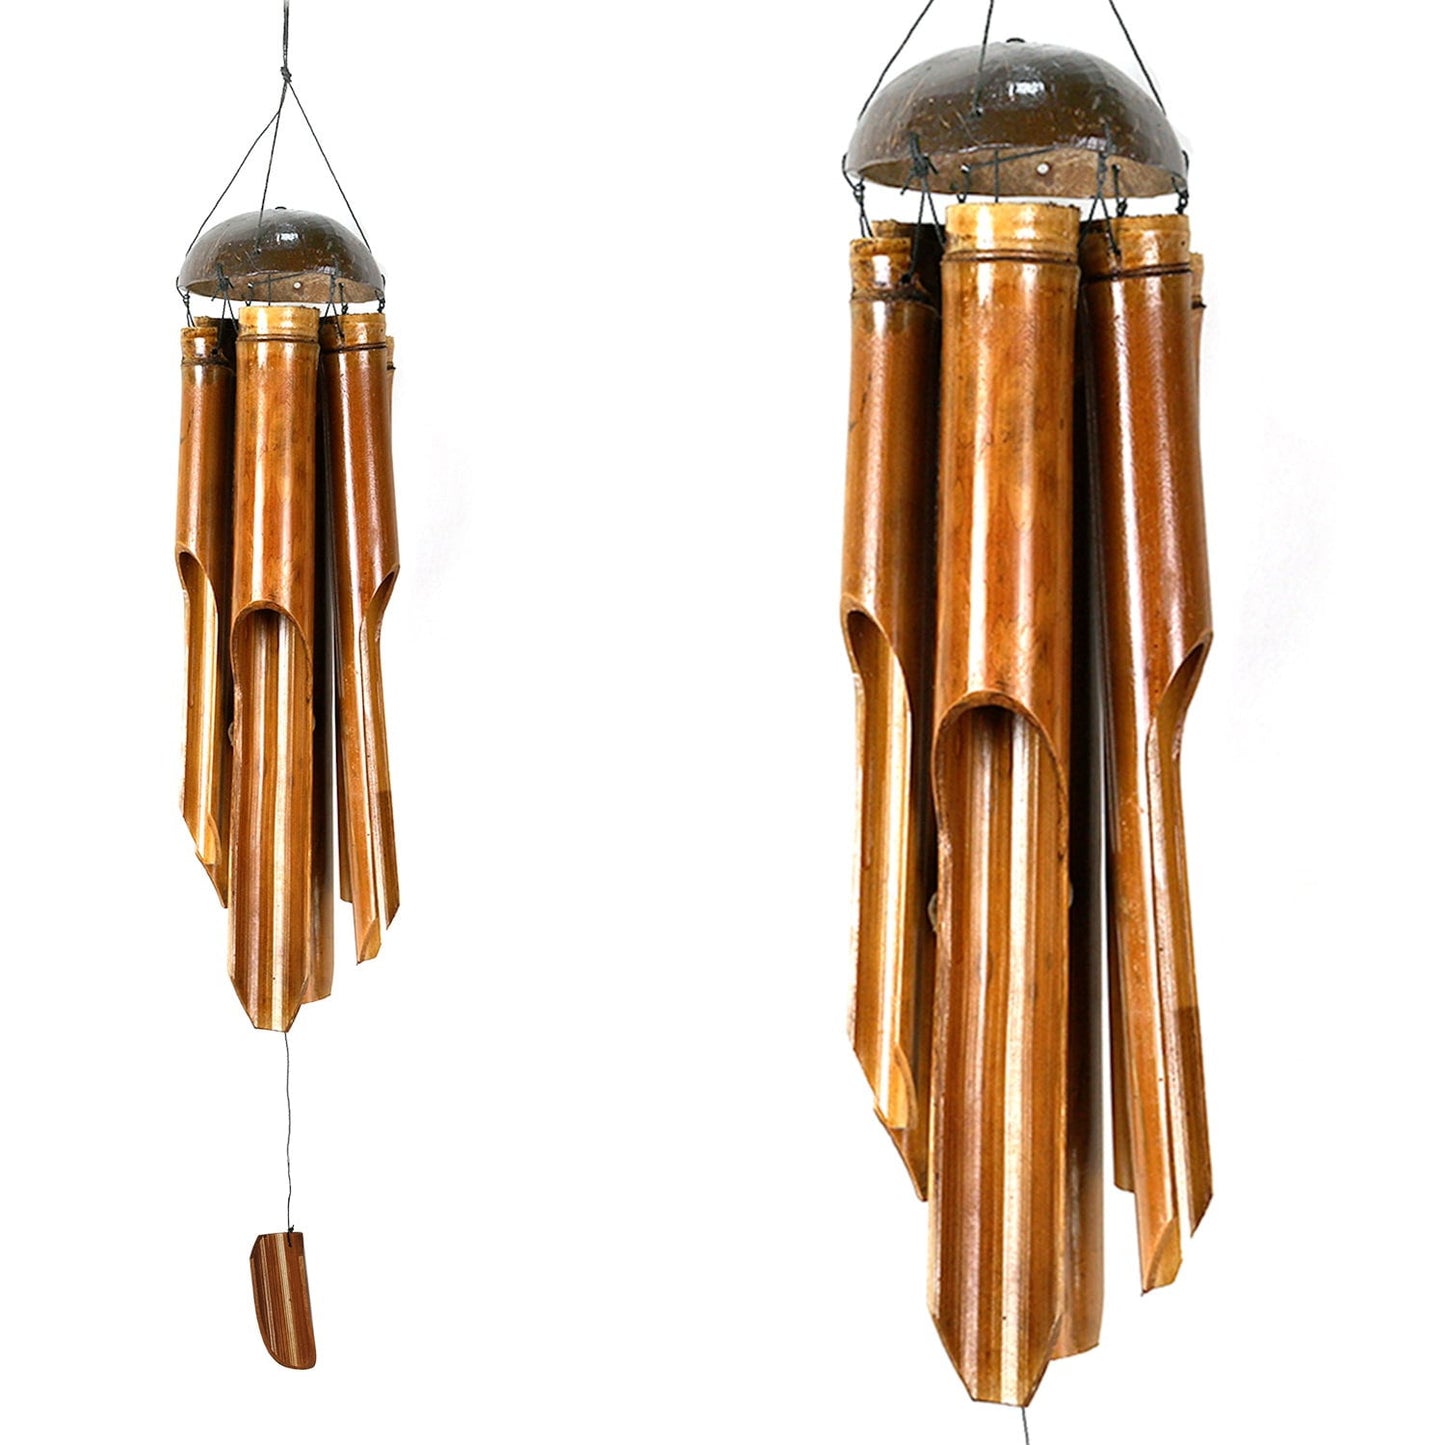 Bamboo wind chime bamboo bamboo rustic Feng shui chime made of bamboo decoration for outdoors made of wood handmade